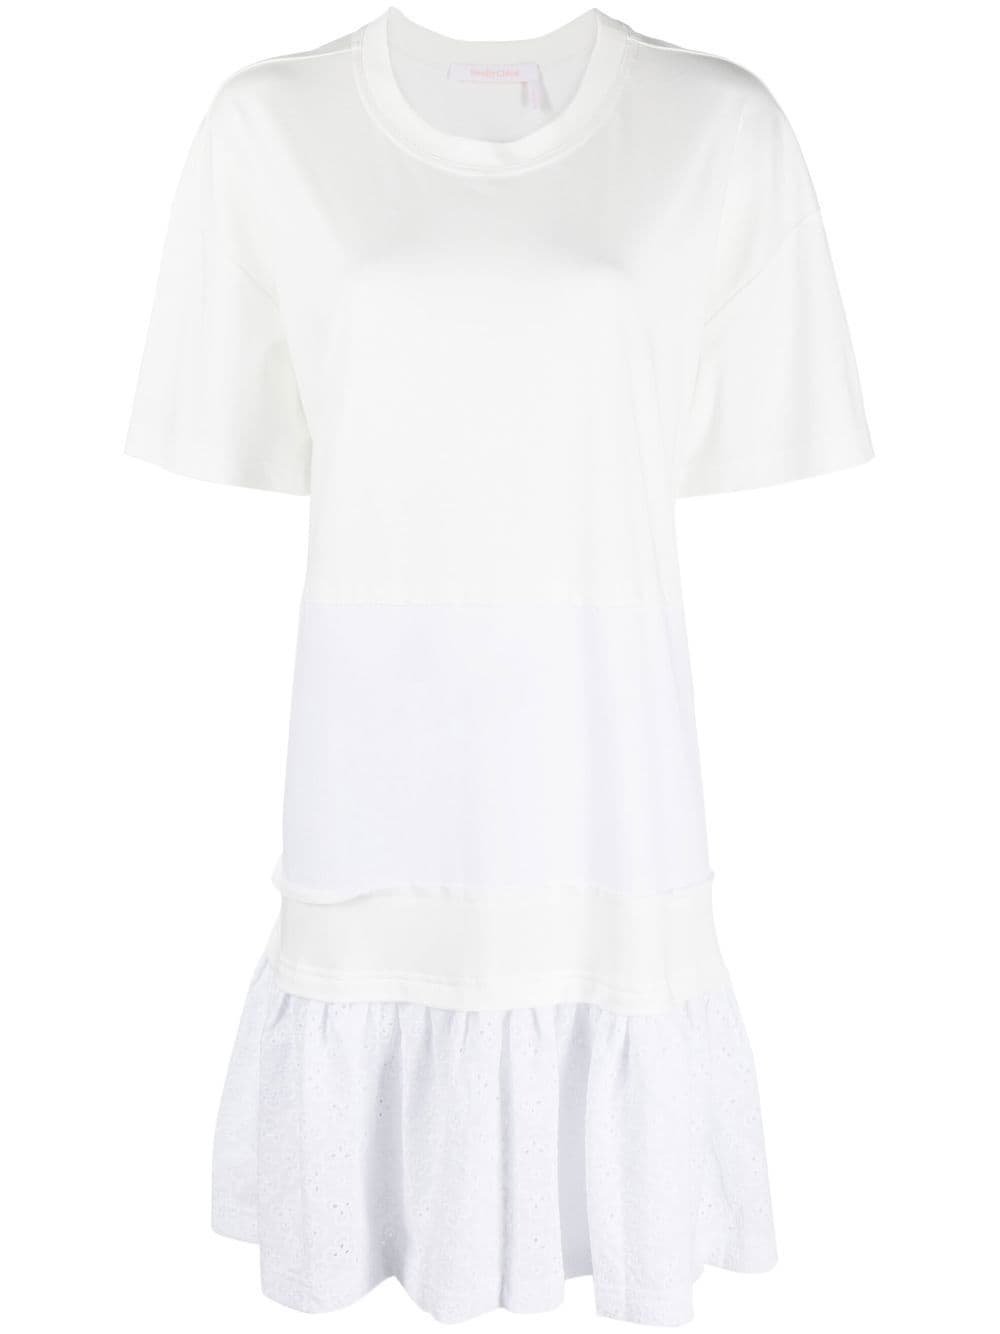 See by Chloé broderie-anglaise T-shirt dress - White von See by Chloé